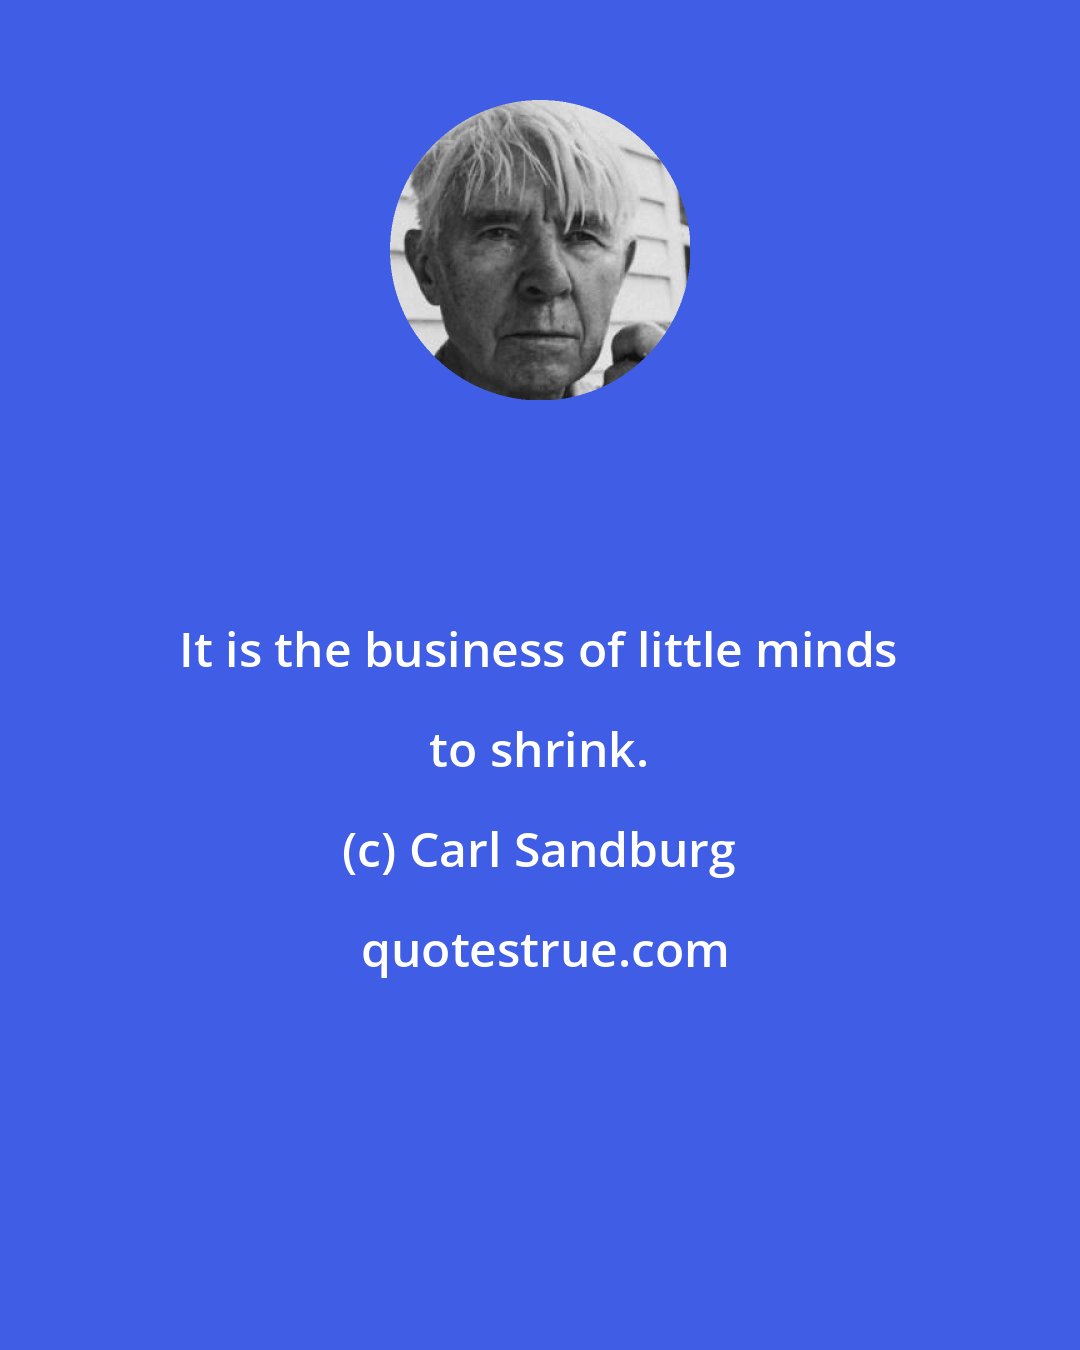 Carl Sandburg: It is the business of little minds to shrink.